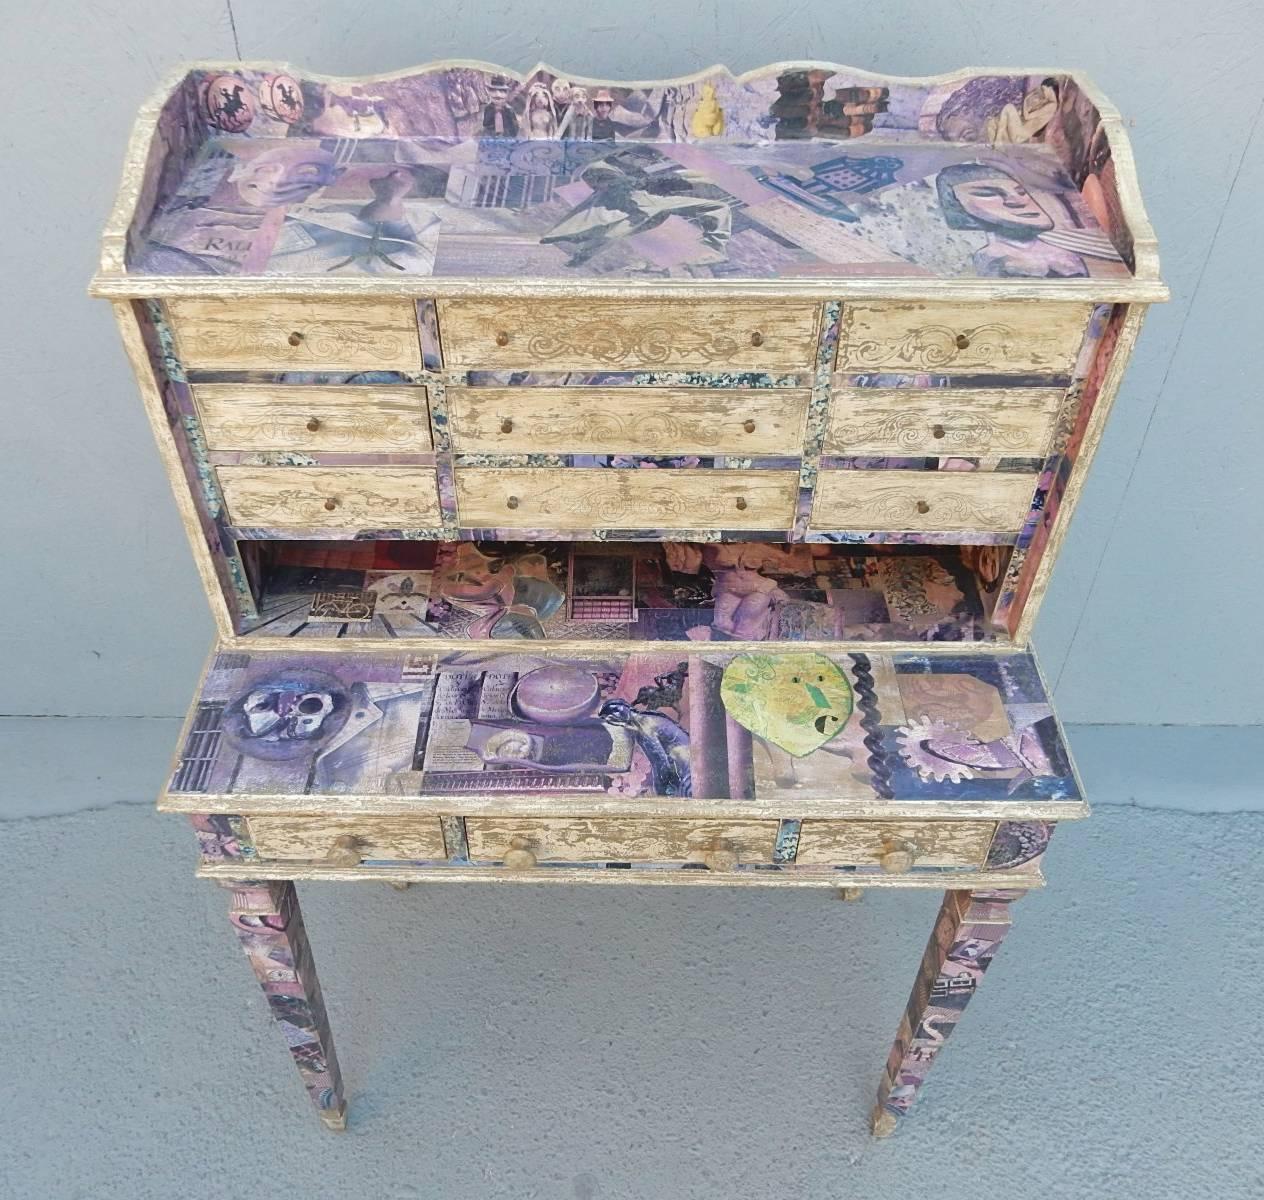 Unique French mixed media art secretary desk, circa 1950s.
Glaze applied European magazine clippings cover every area except drawer fronts.
9 small upper drawers and three lower drawers under writing area.
Photos don't show the marvelous detail